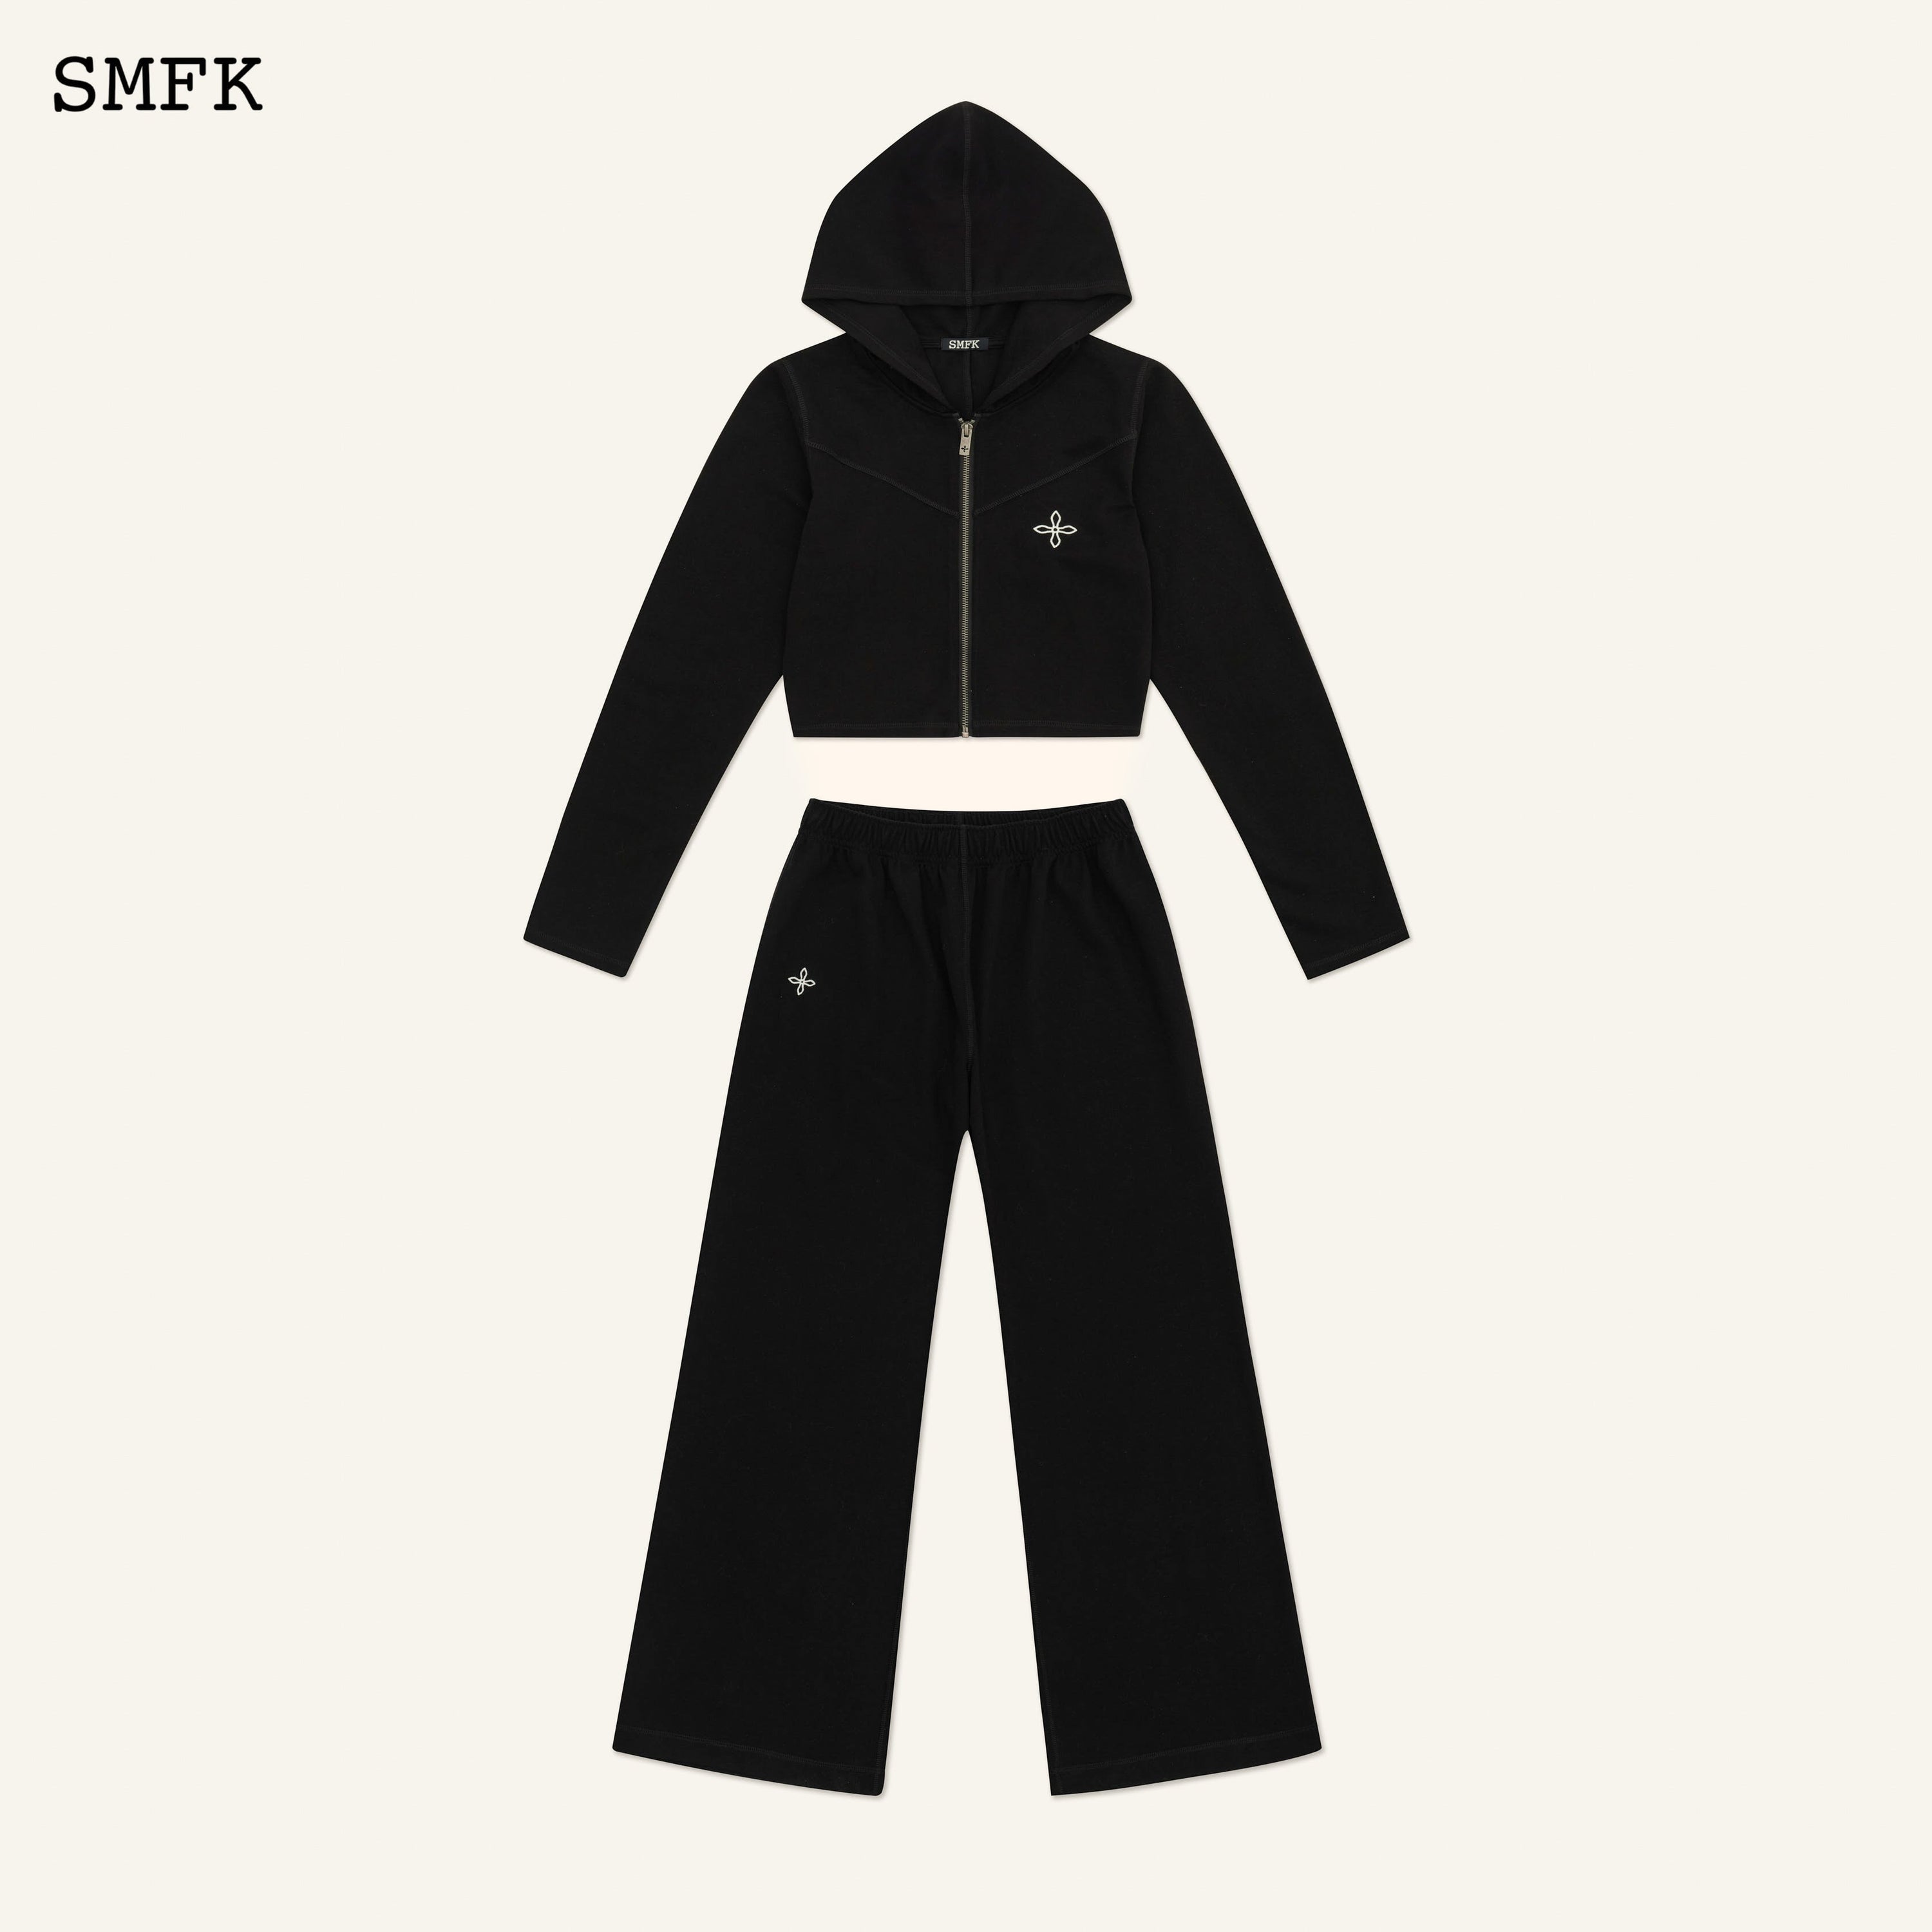 Compass Rove Jogging Sport Suit In Black - SMFK Official